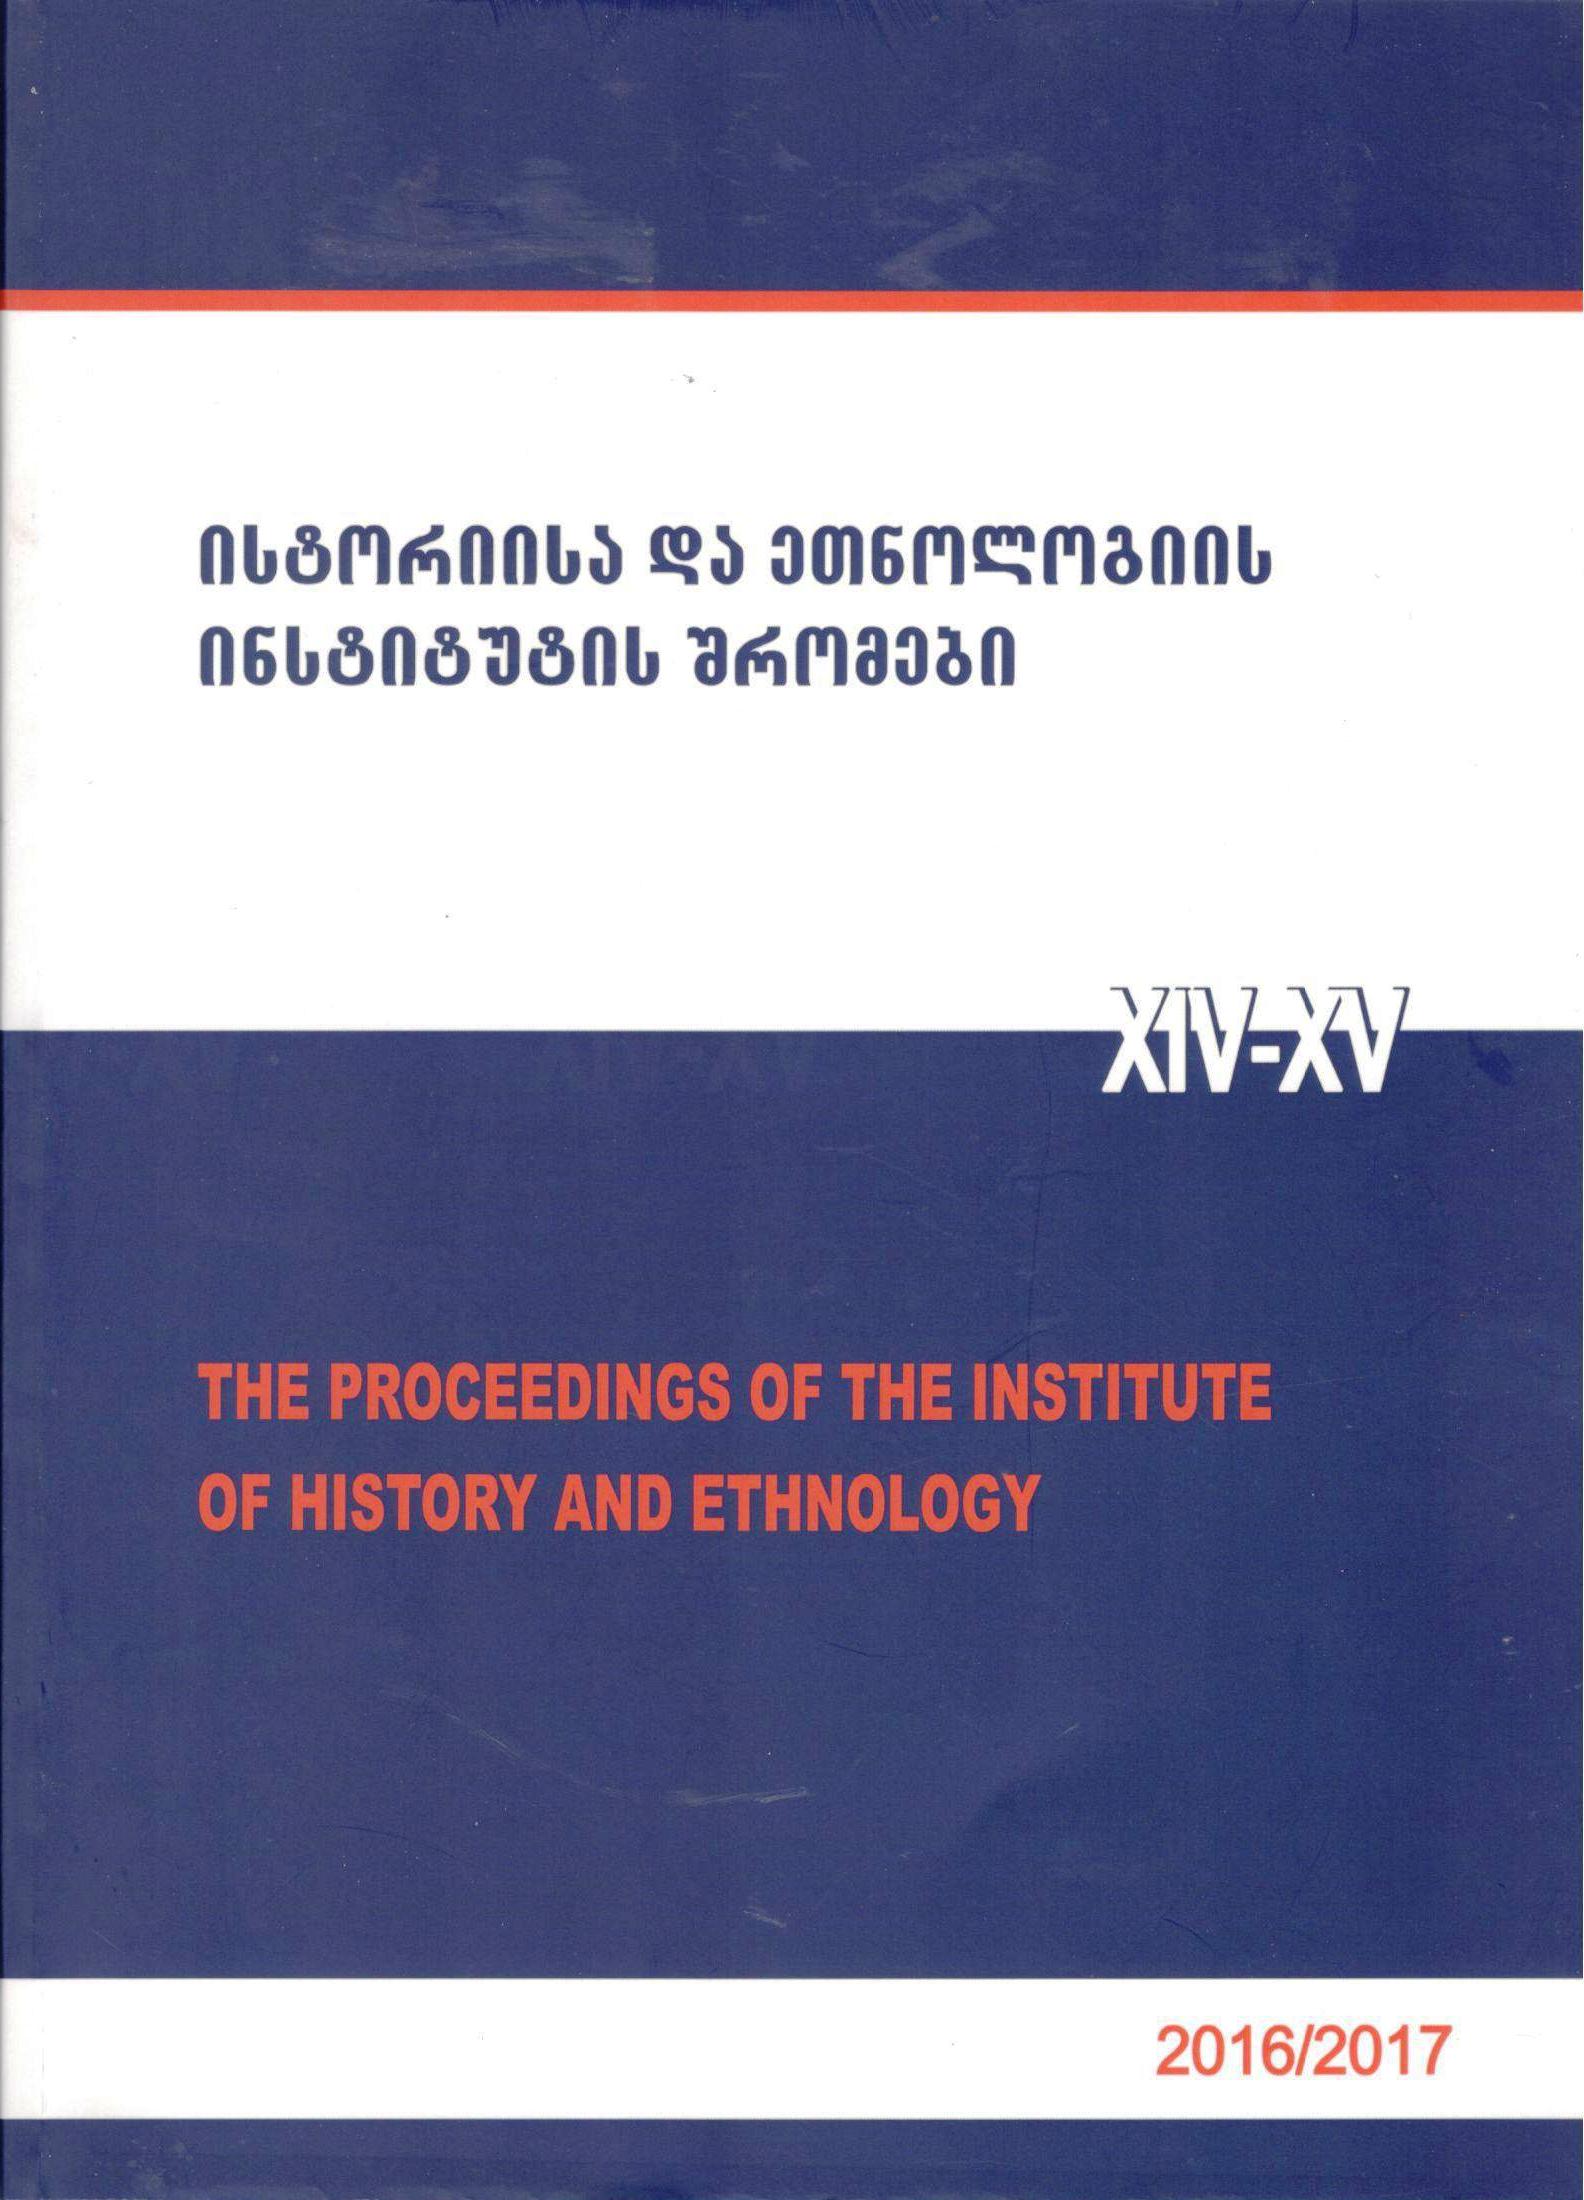 The Proceedings of the Institute of History and Ethnology XIV-XV